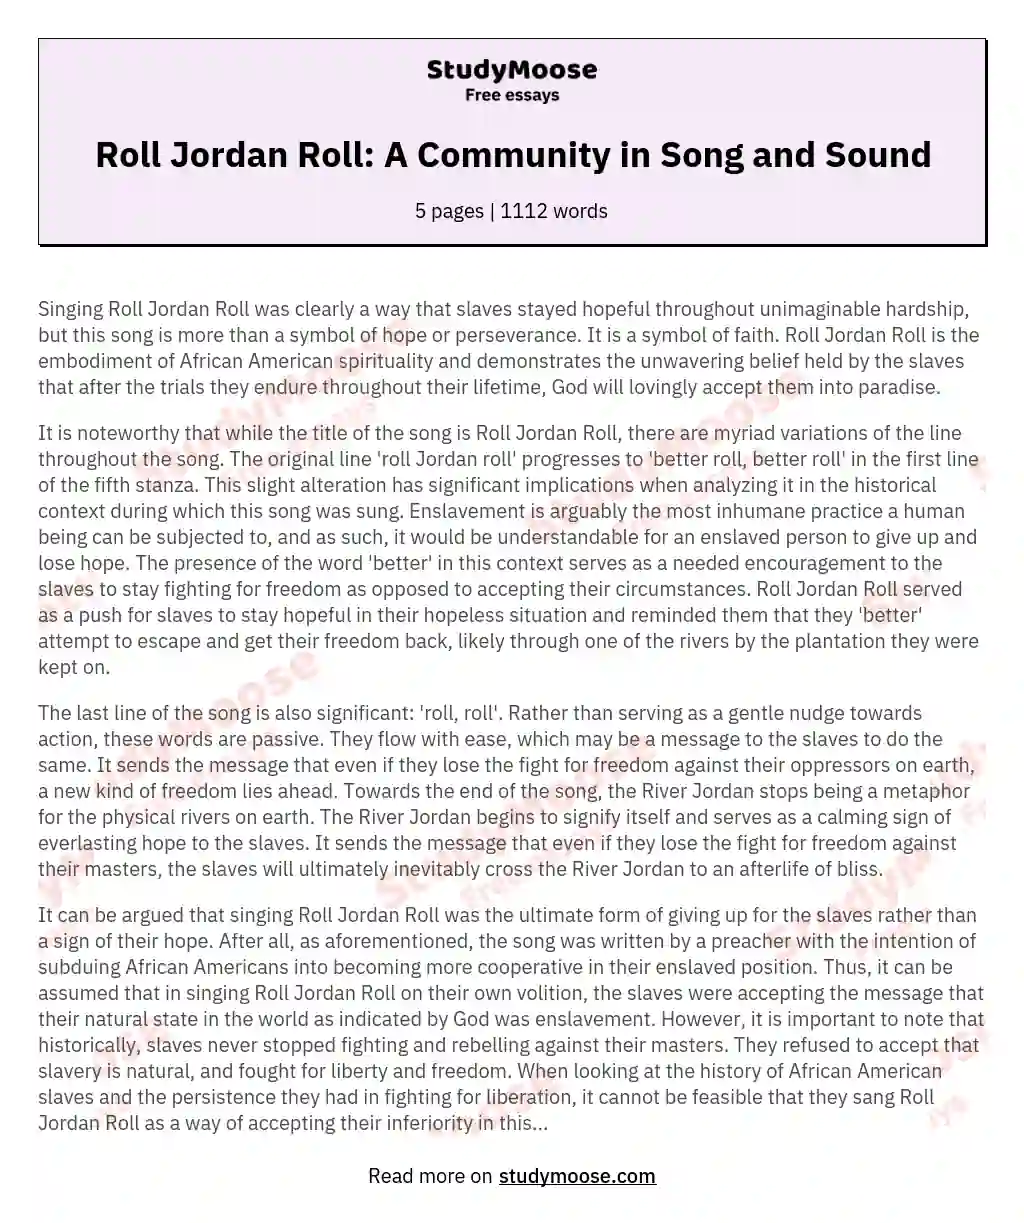 Roll Jordan Roll: A Community in Song and Sound essay